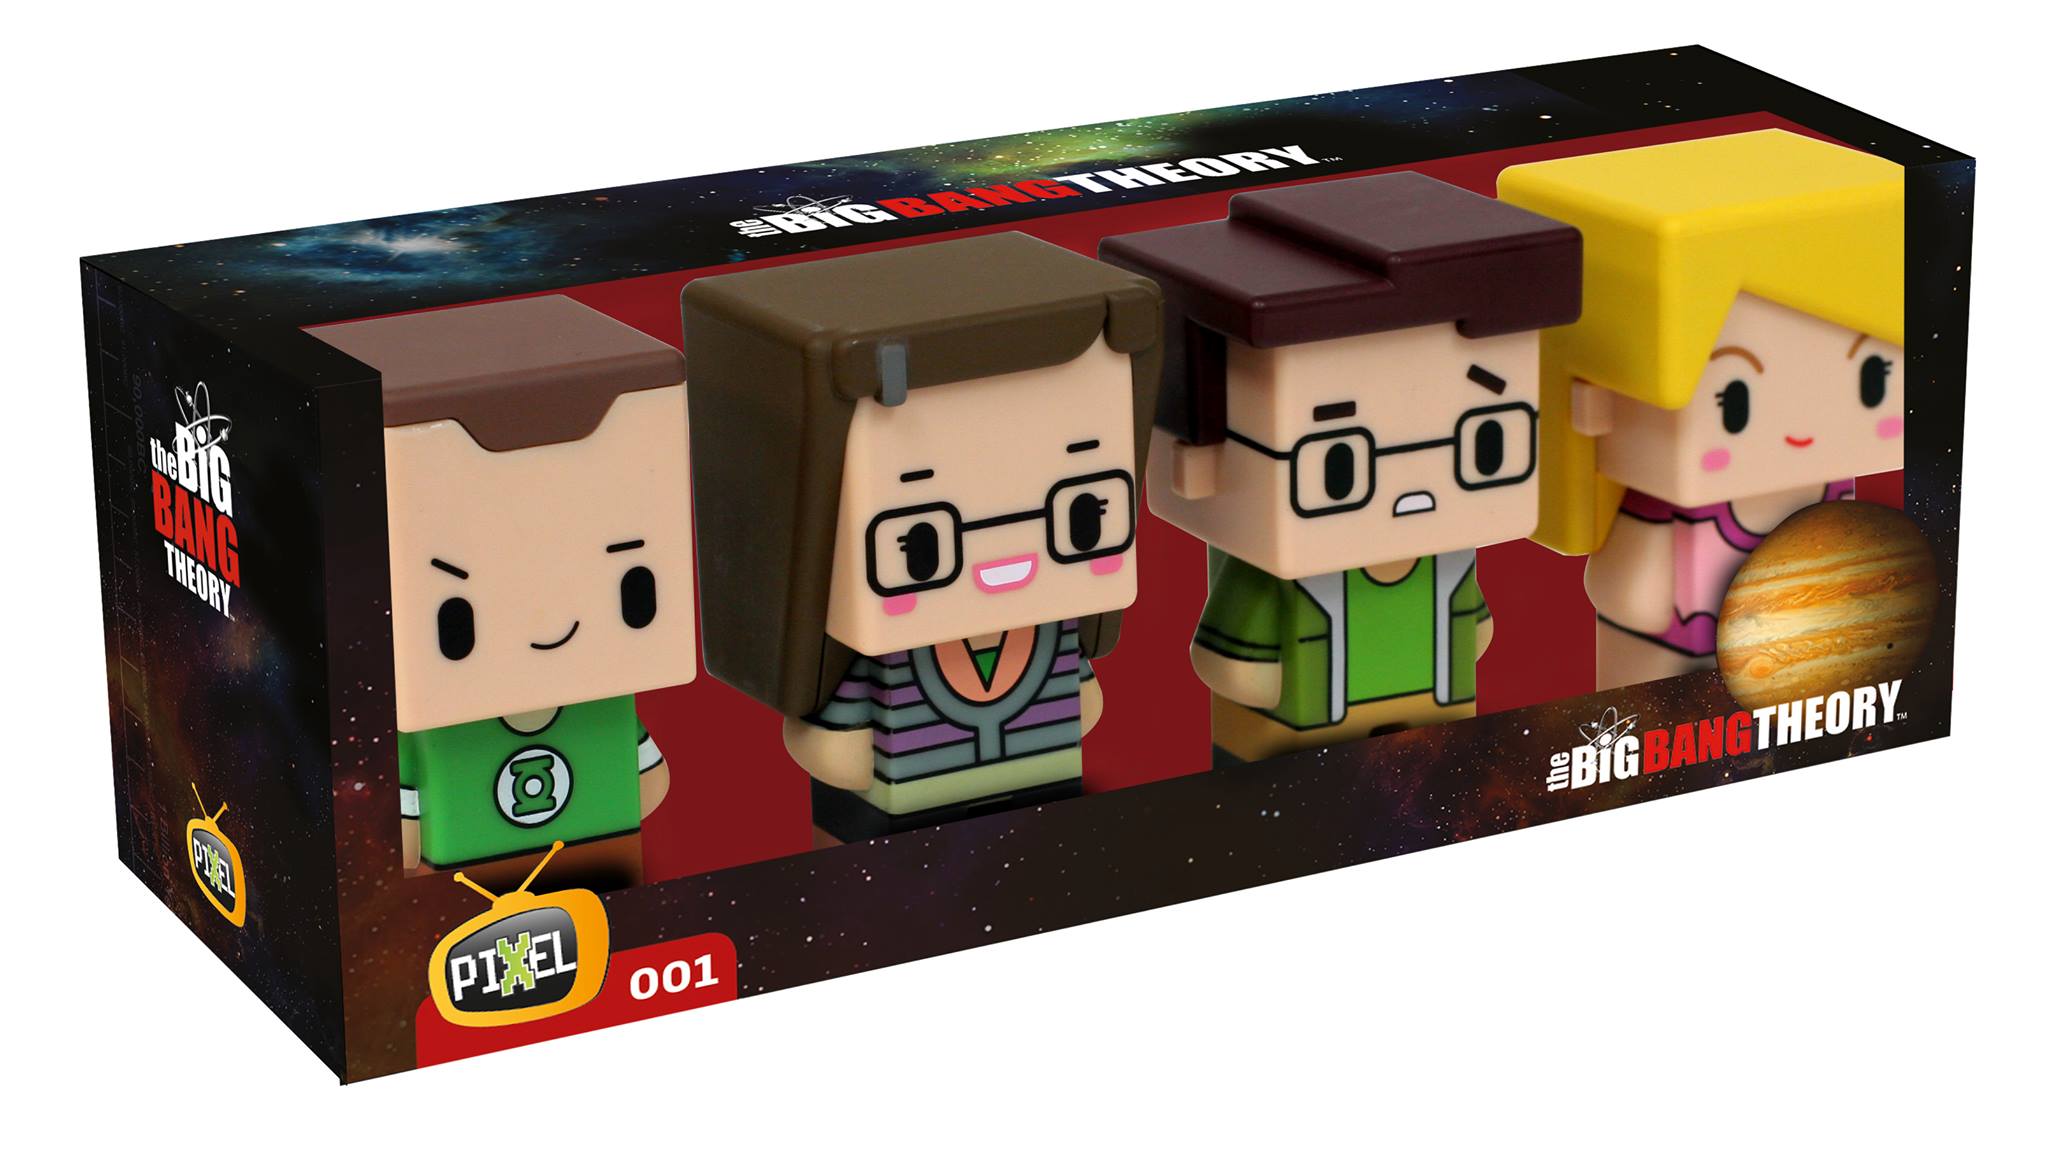  The Big Bang Theory SD TOYS PIXEL serie 1